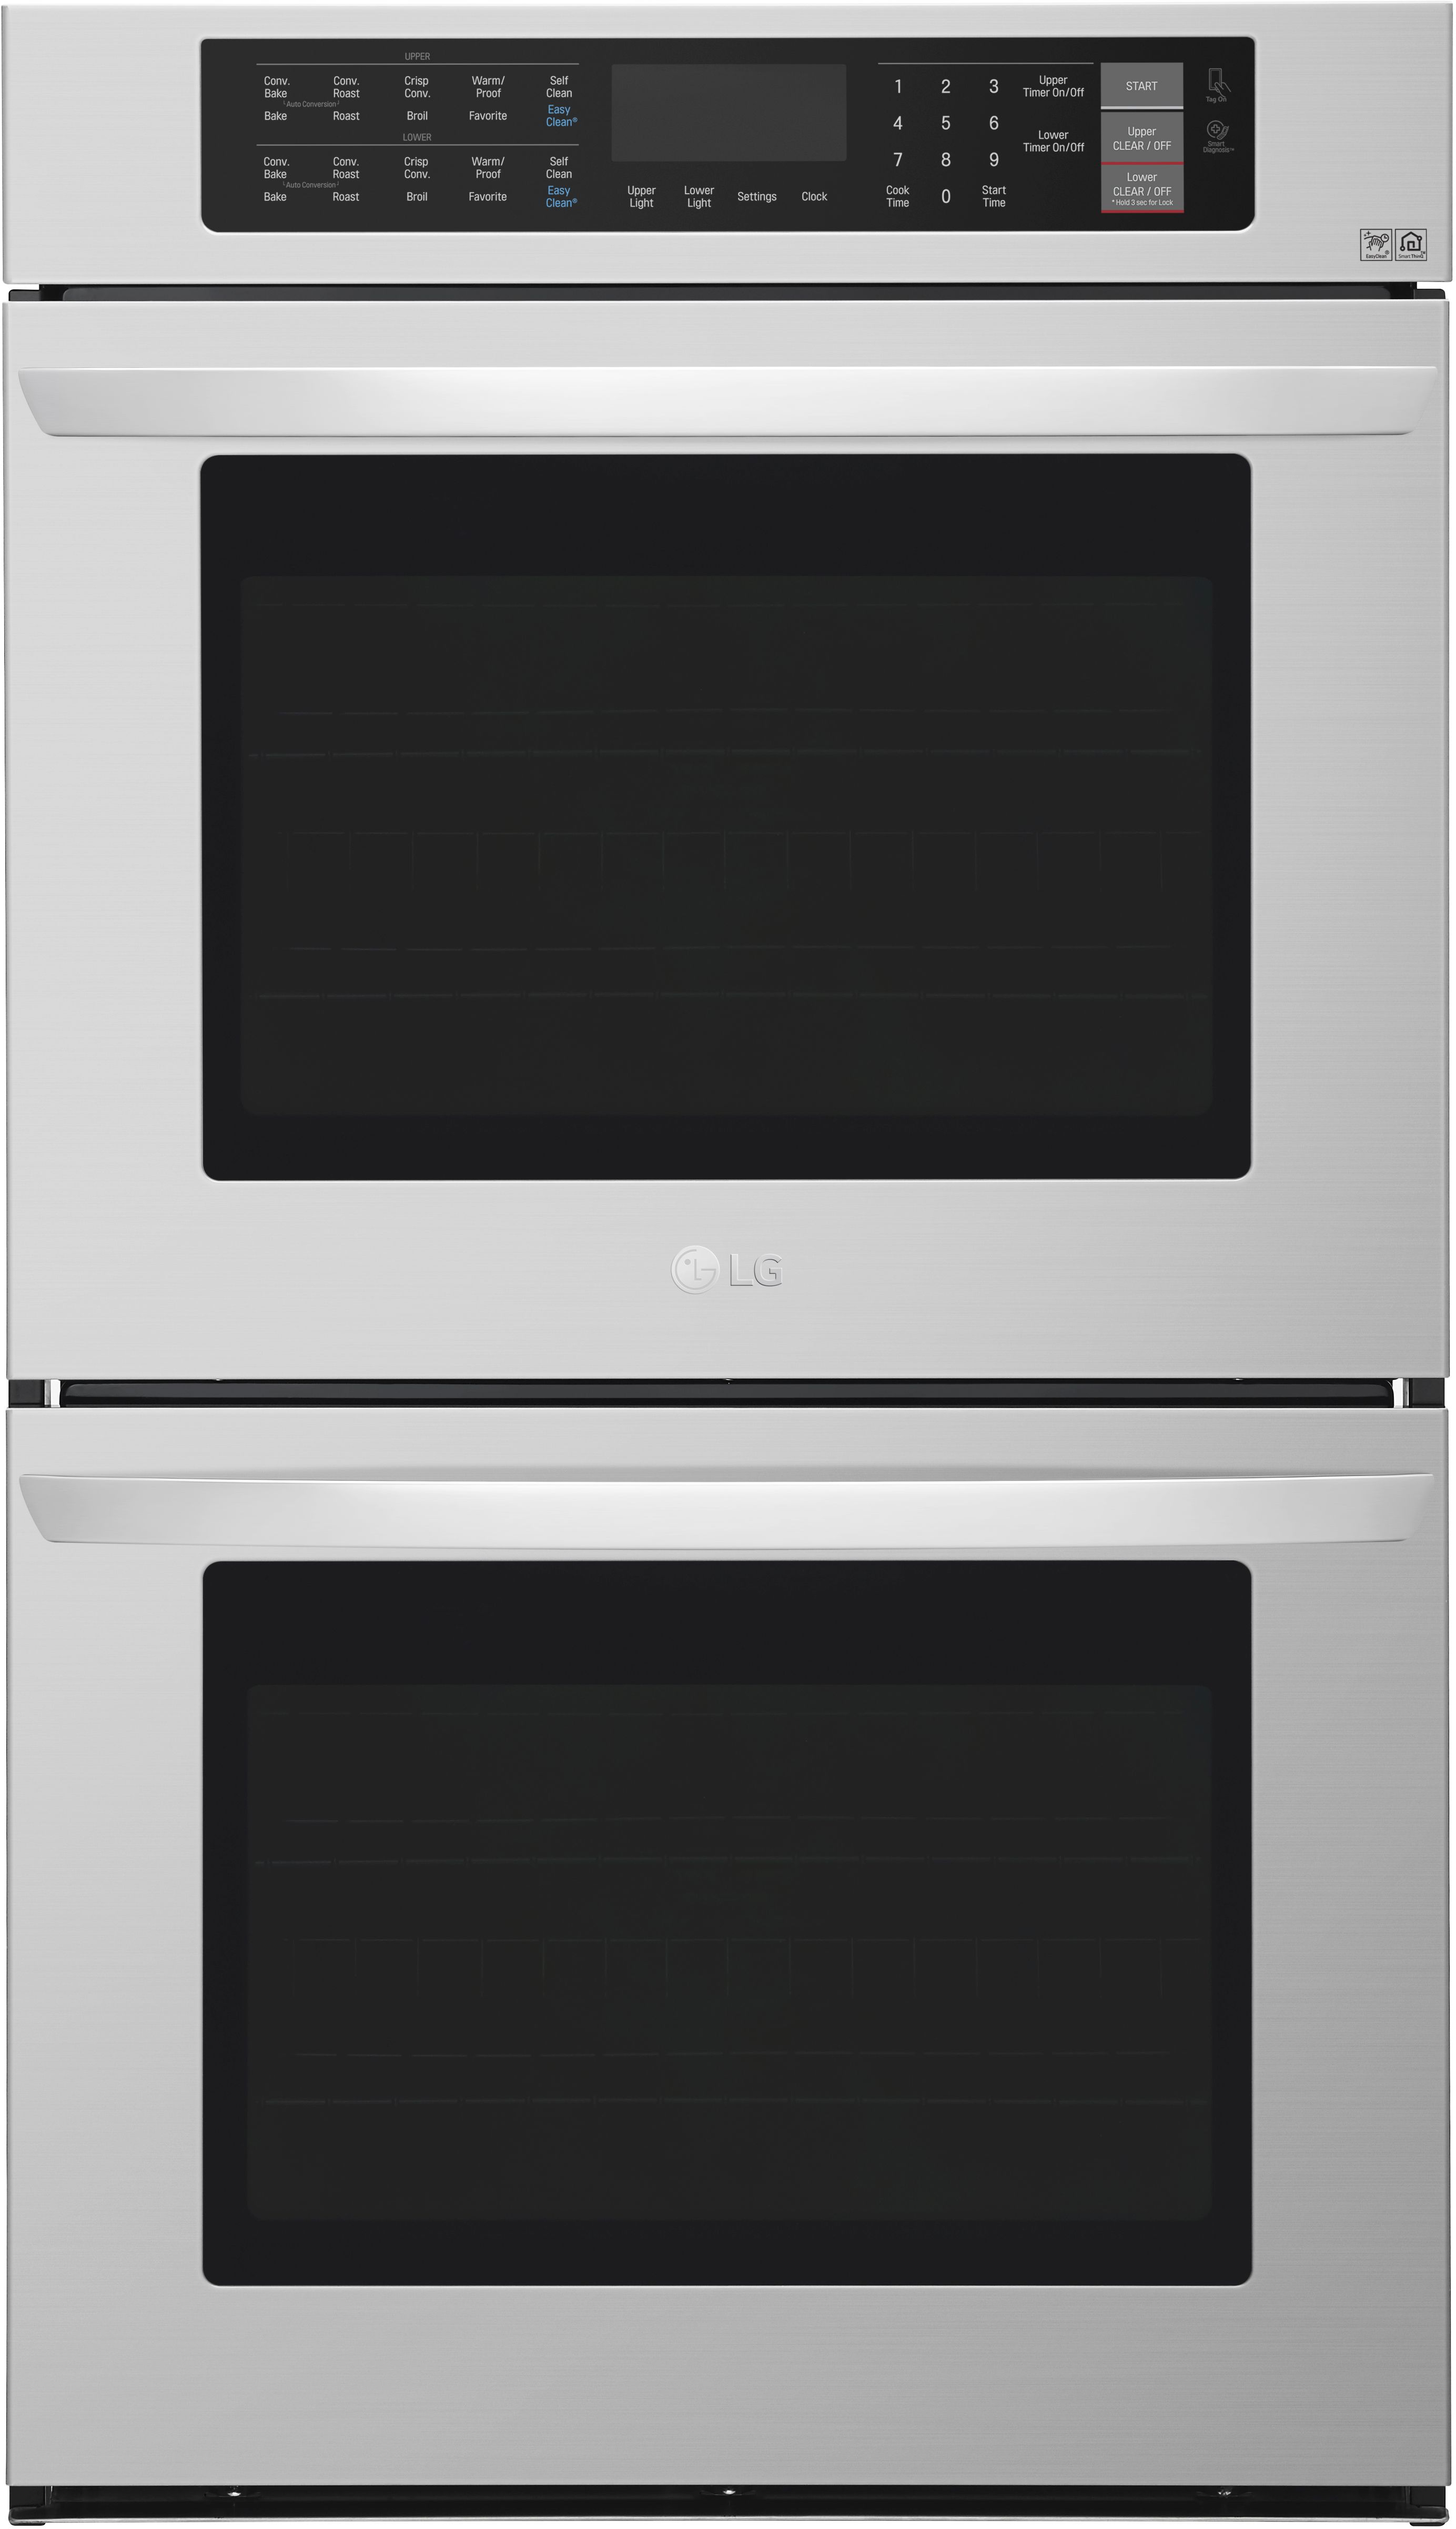 LG 30" Stainless Steel Double Electric Wall Oven